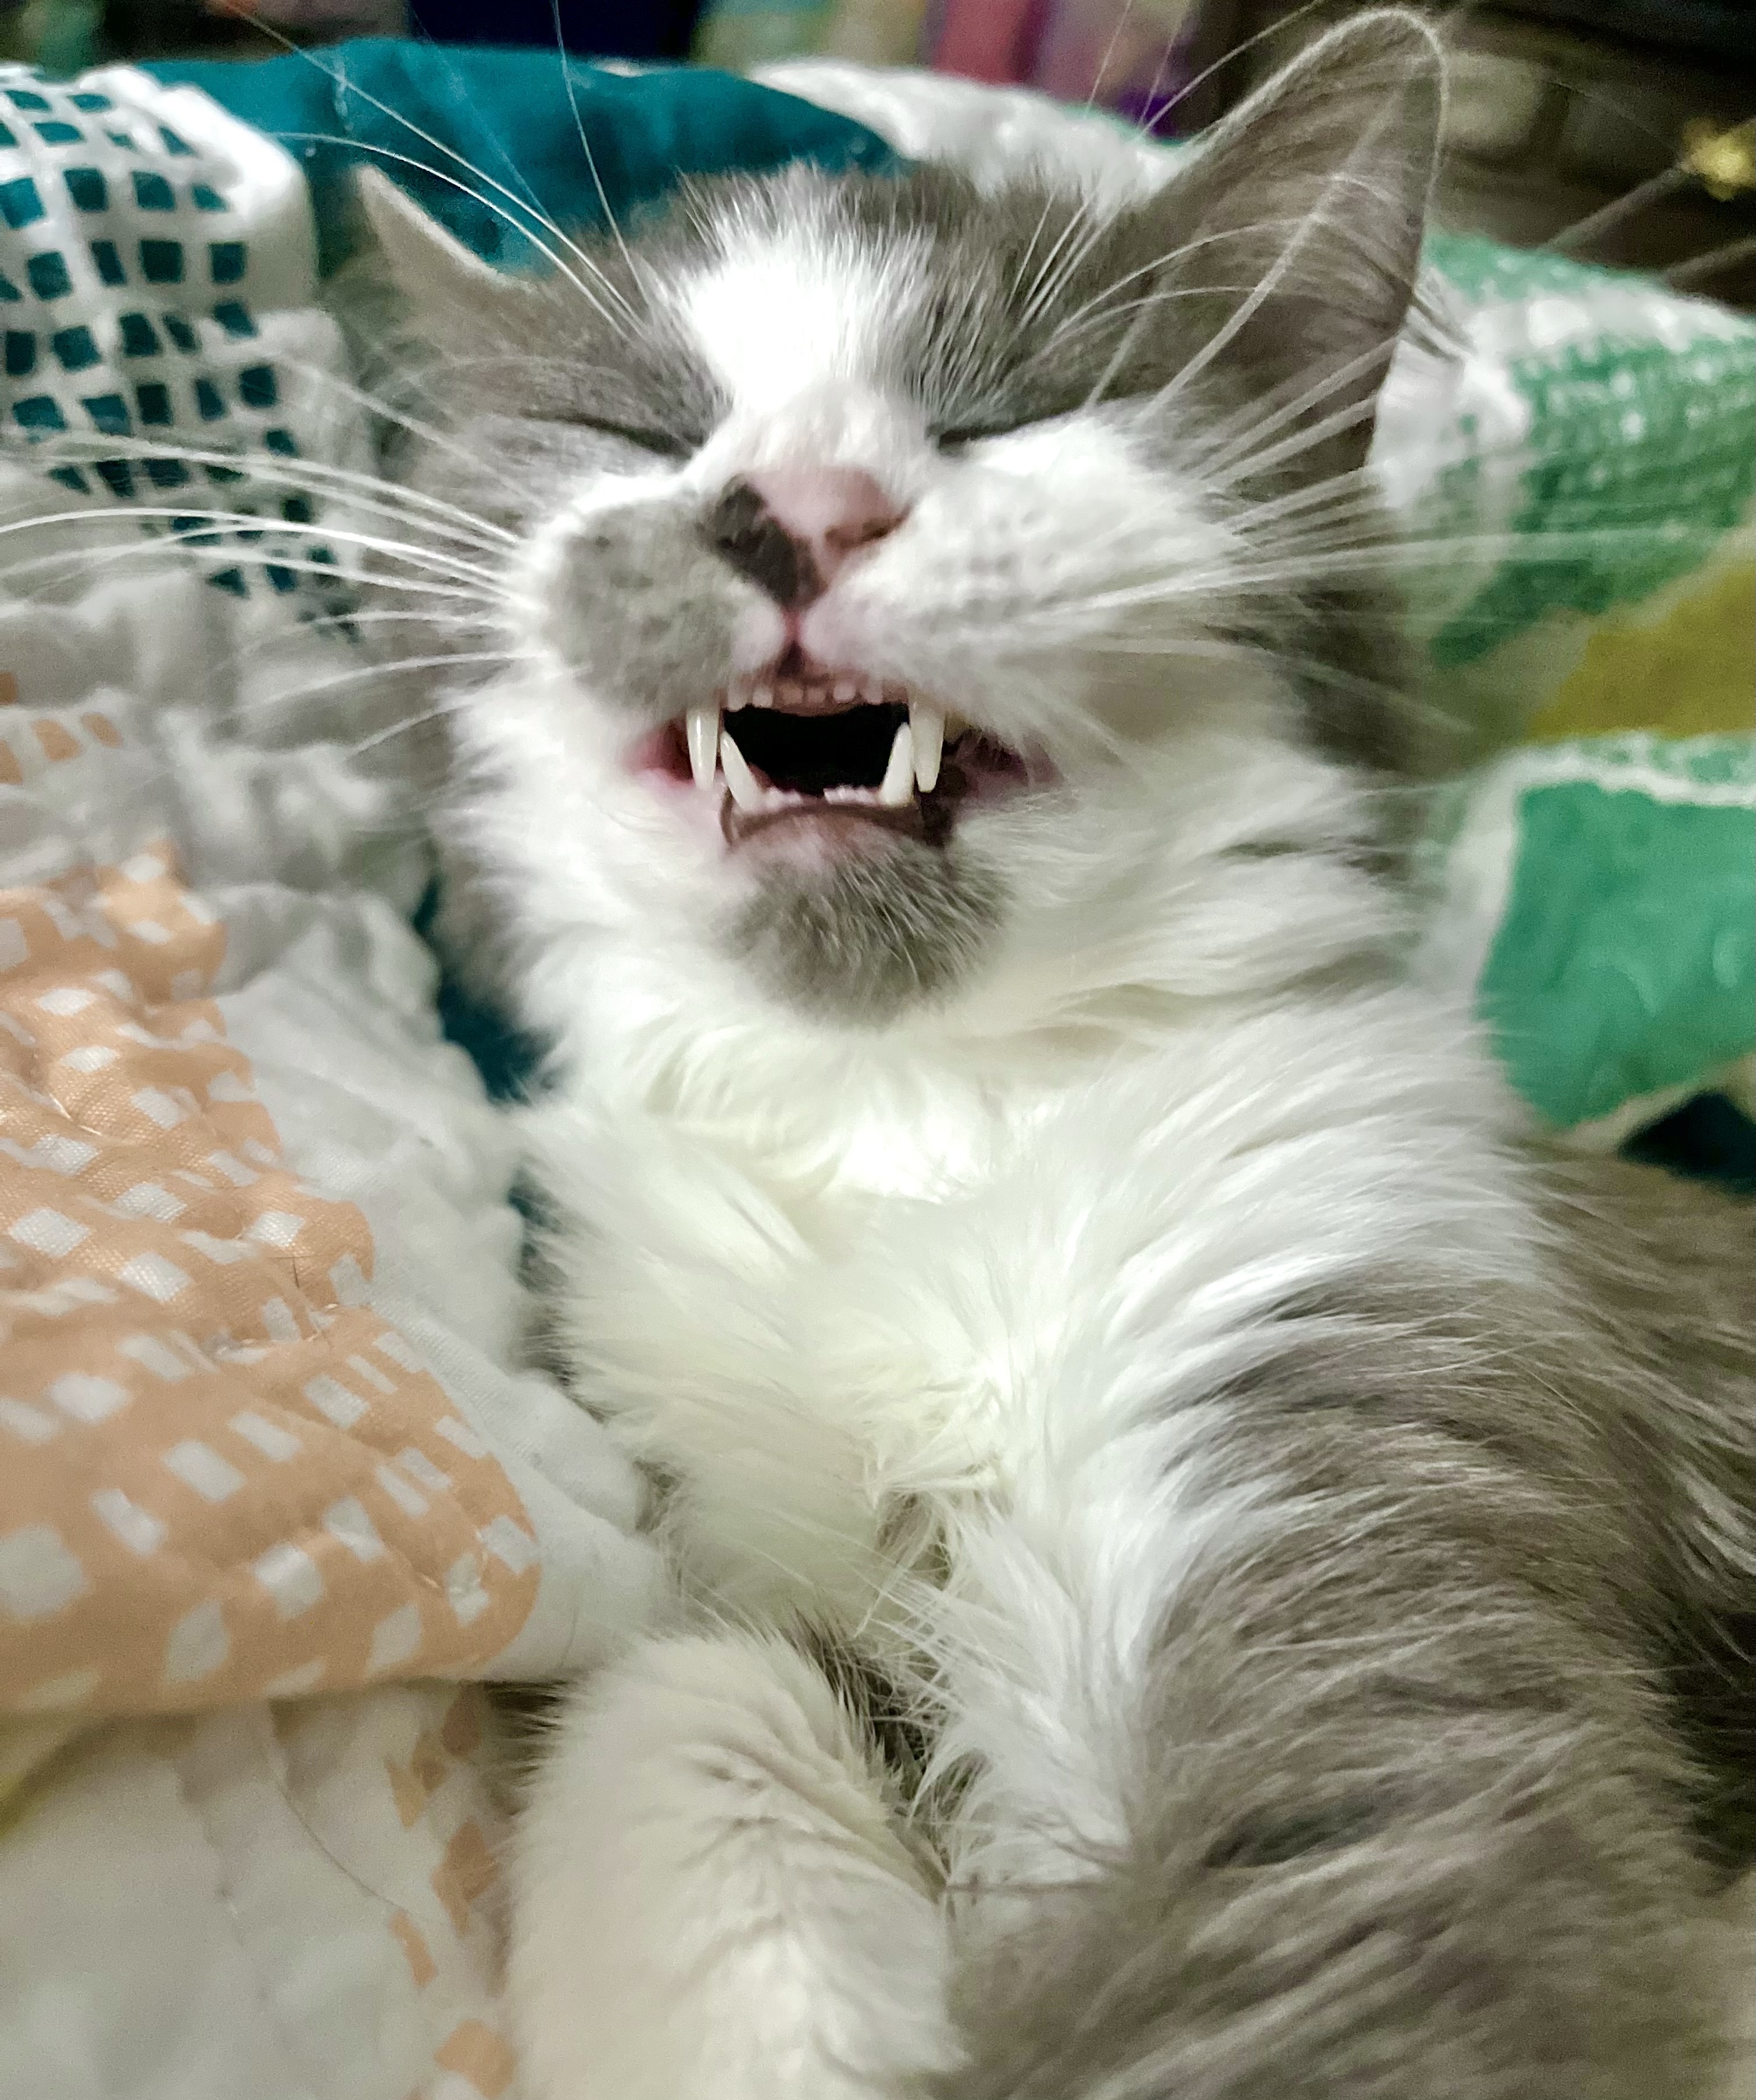 Cat lying on its back with mouth open as if mid-sneeze